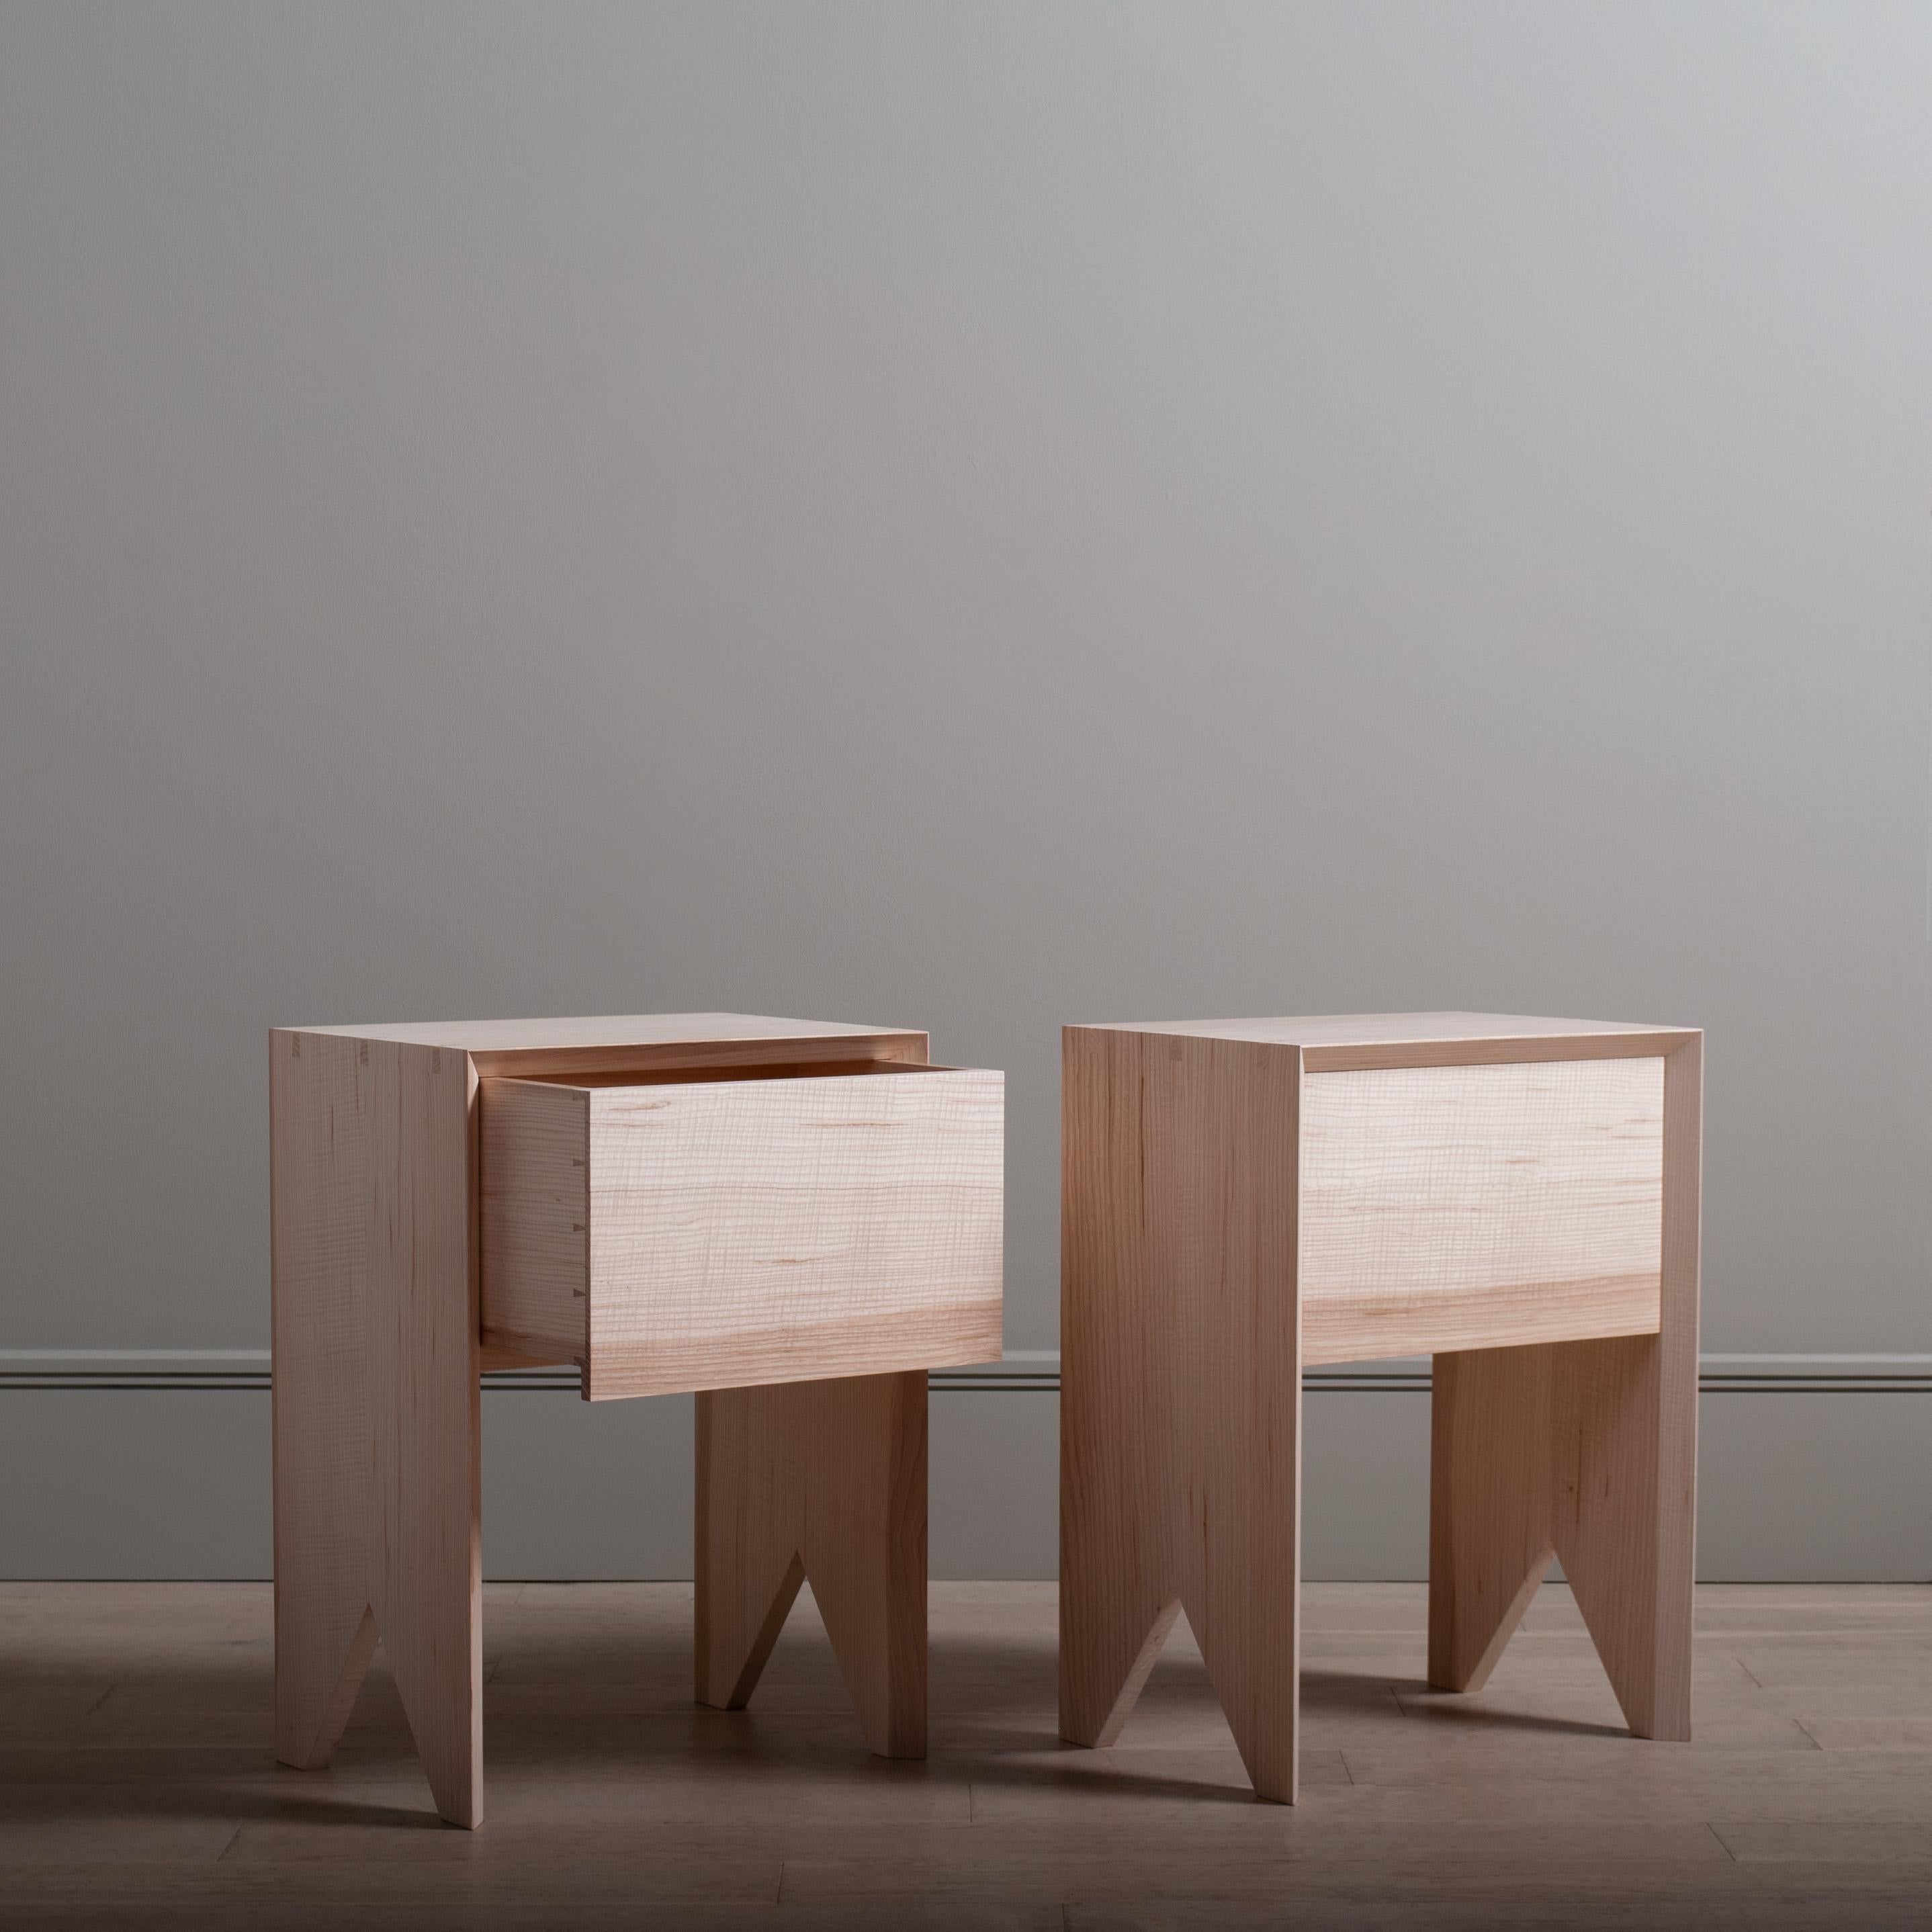 A pair of ultra sleek contemporary hand-crafted English 'ripple' ash night stand tables with storage drawer. 
Designed with real minimalism in mind - whilst highlighting the handmade construction details with exposed mitred key dovetail jointing.